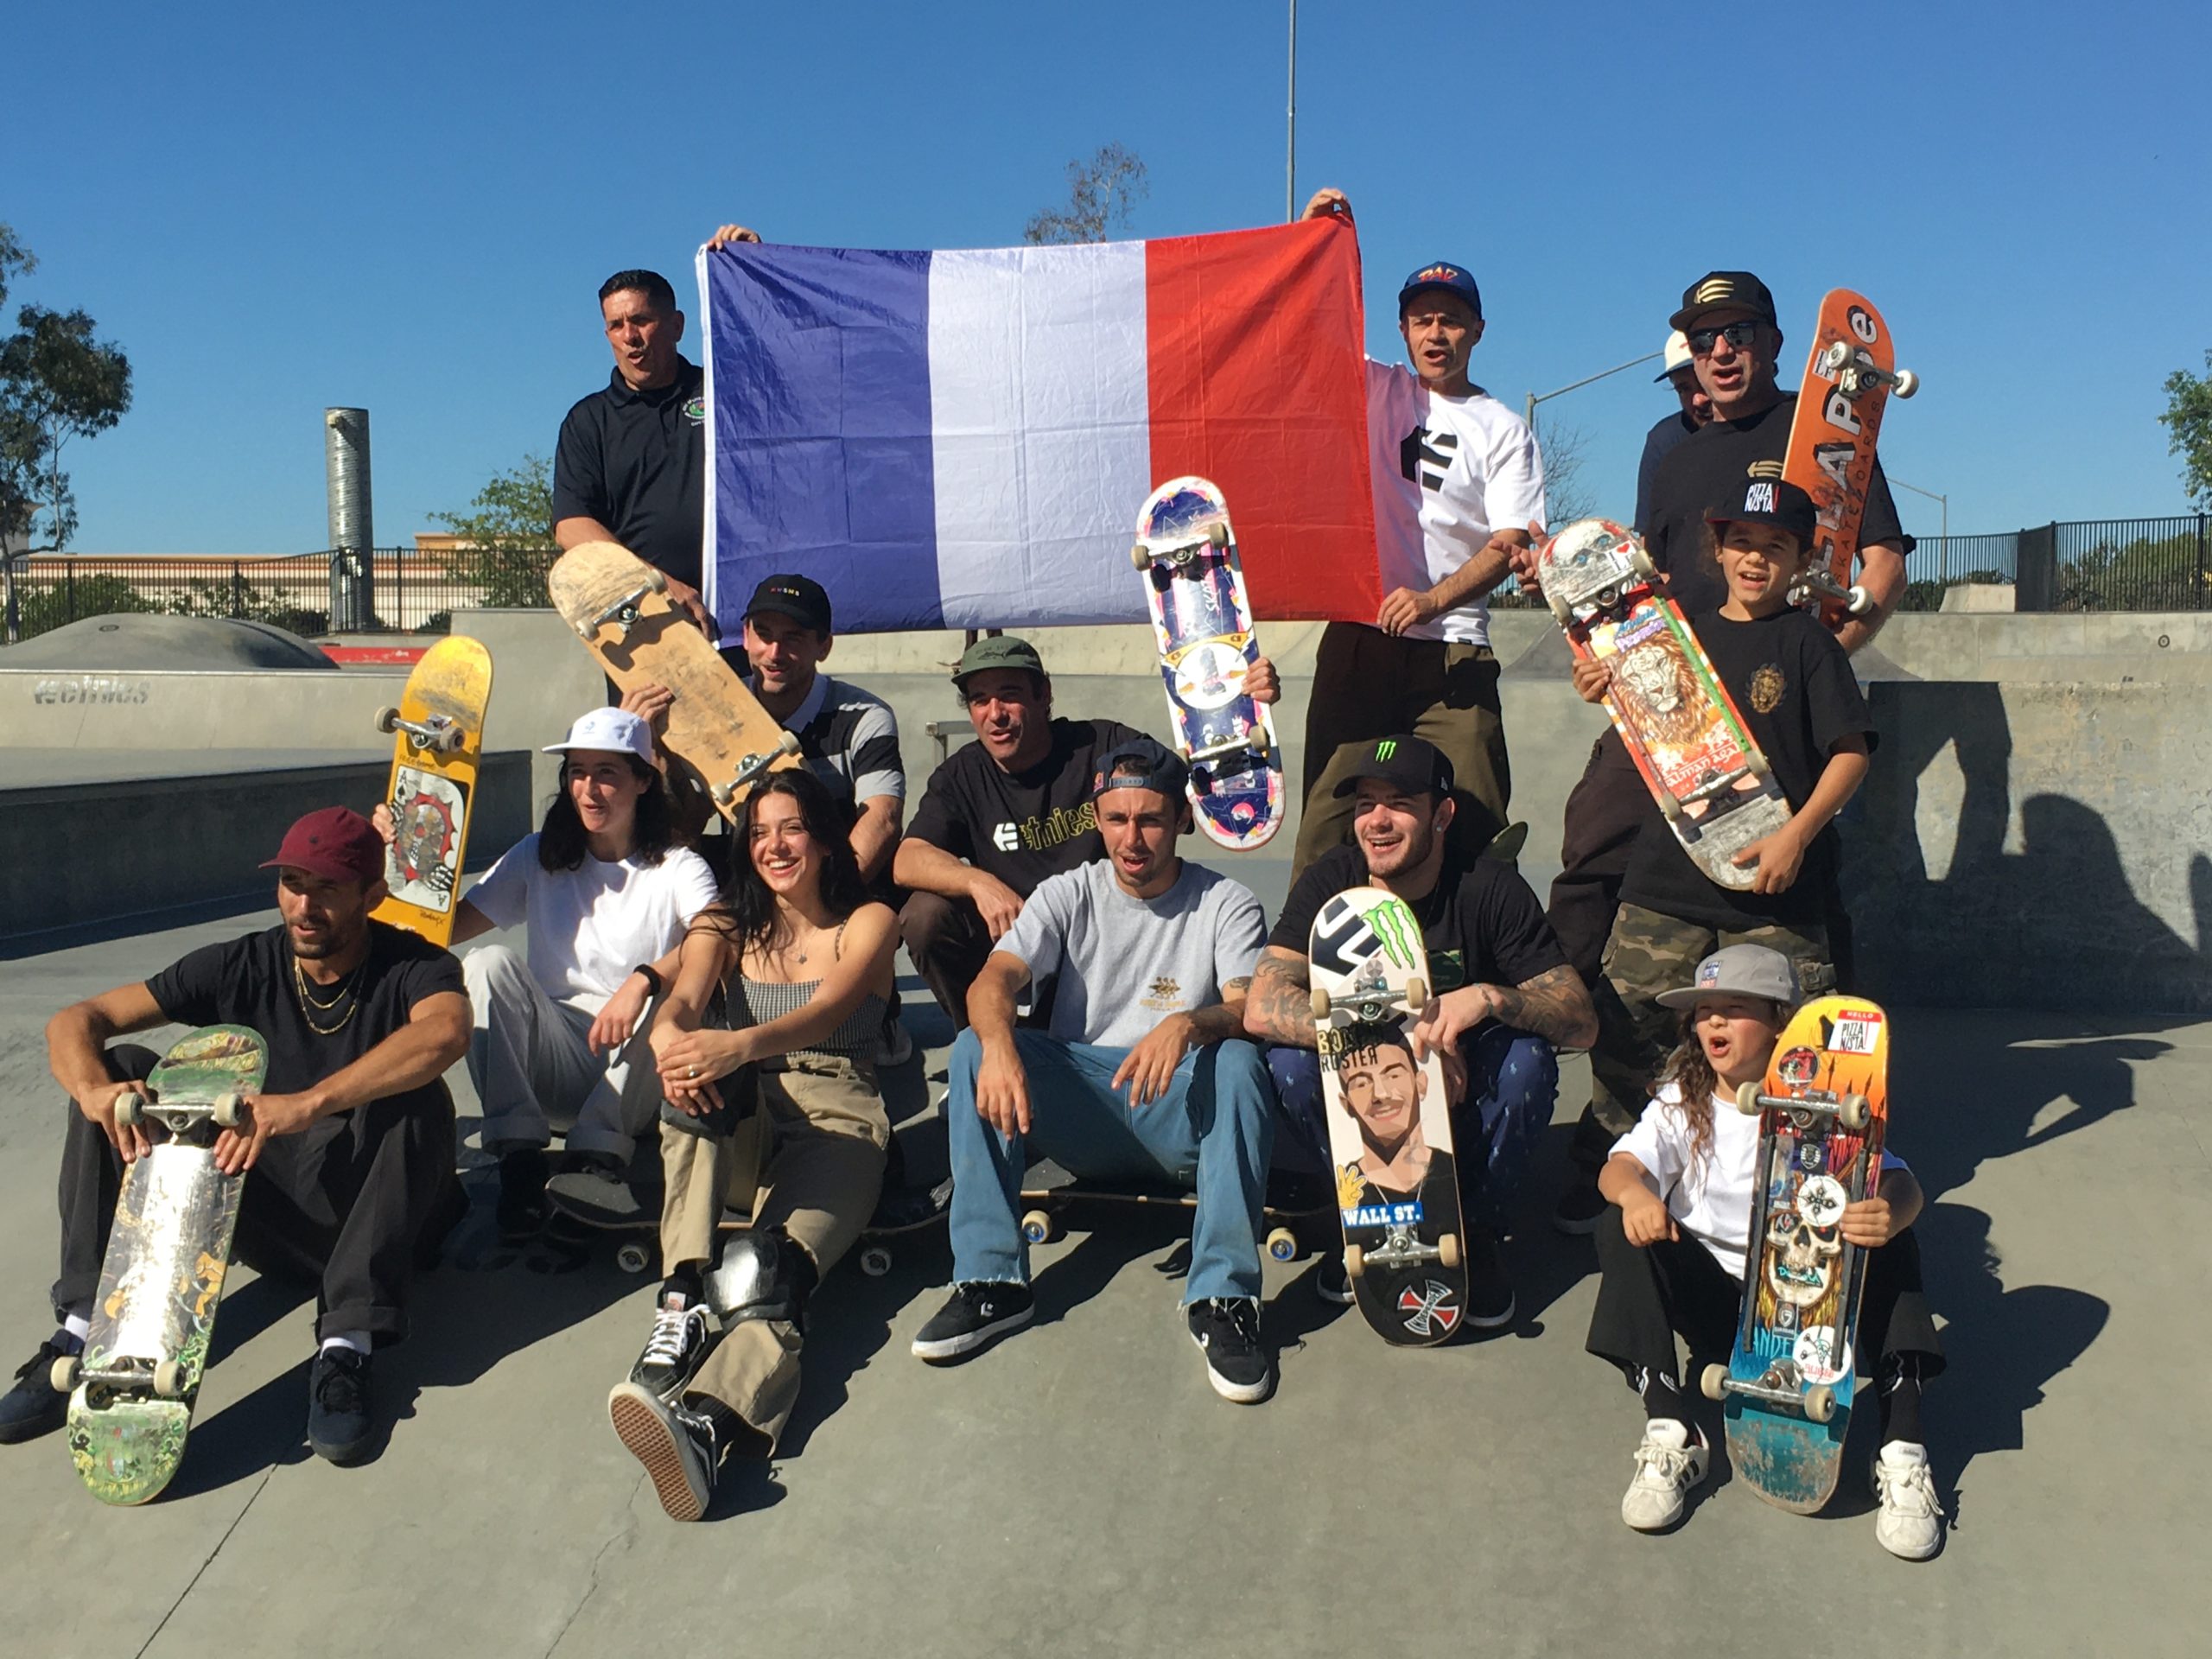 Julian and the French National Skateboarding team